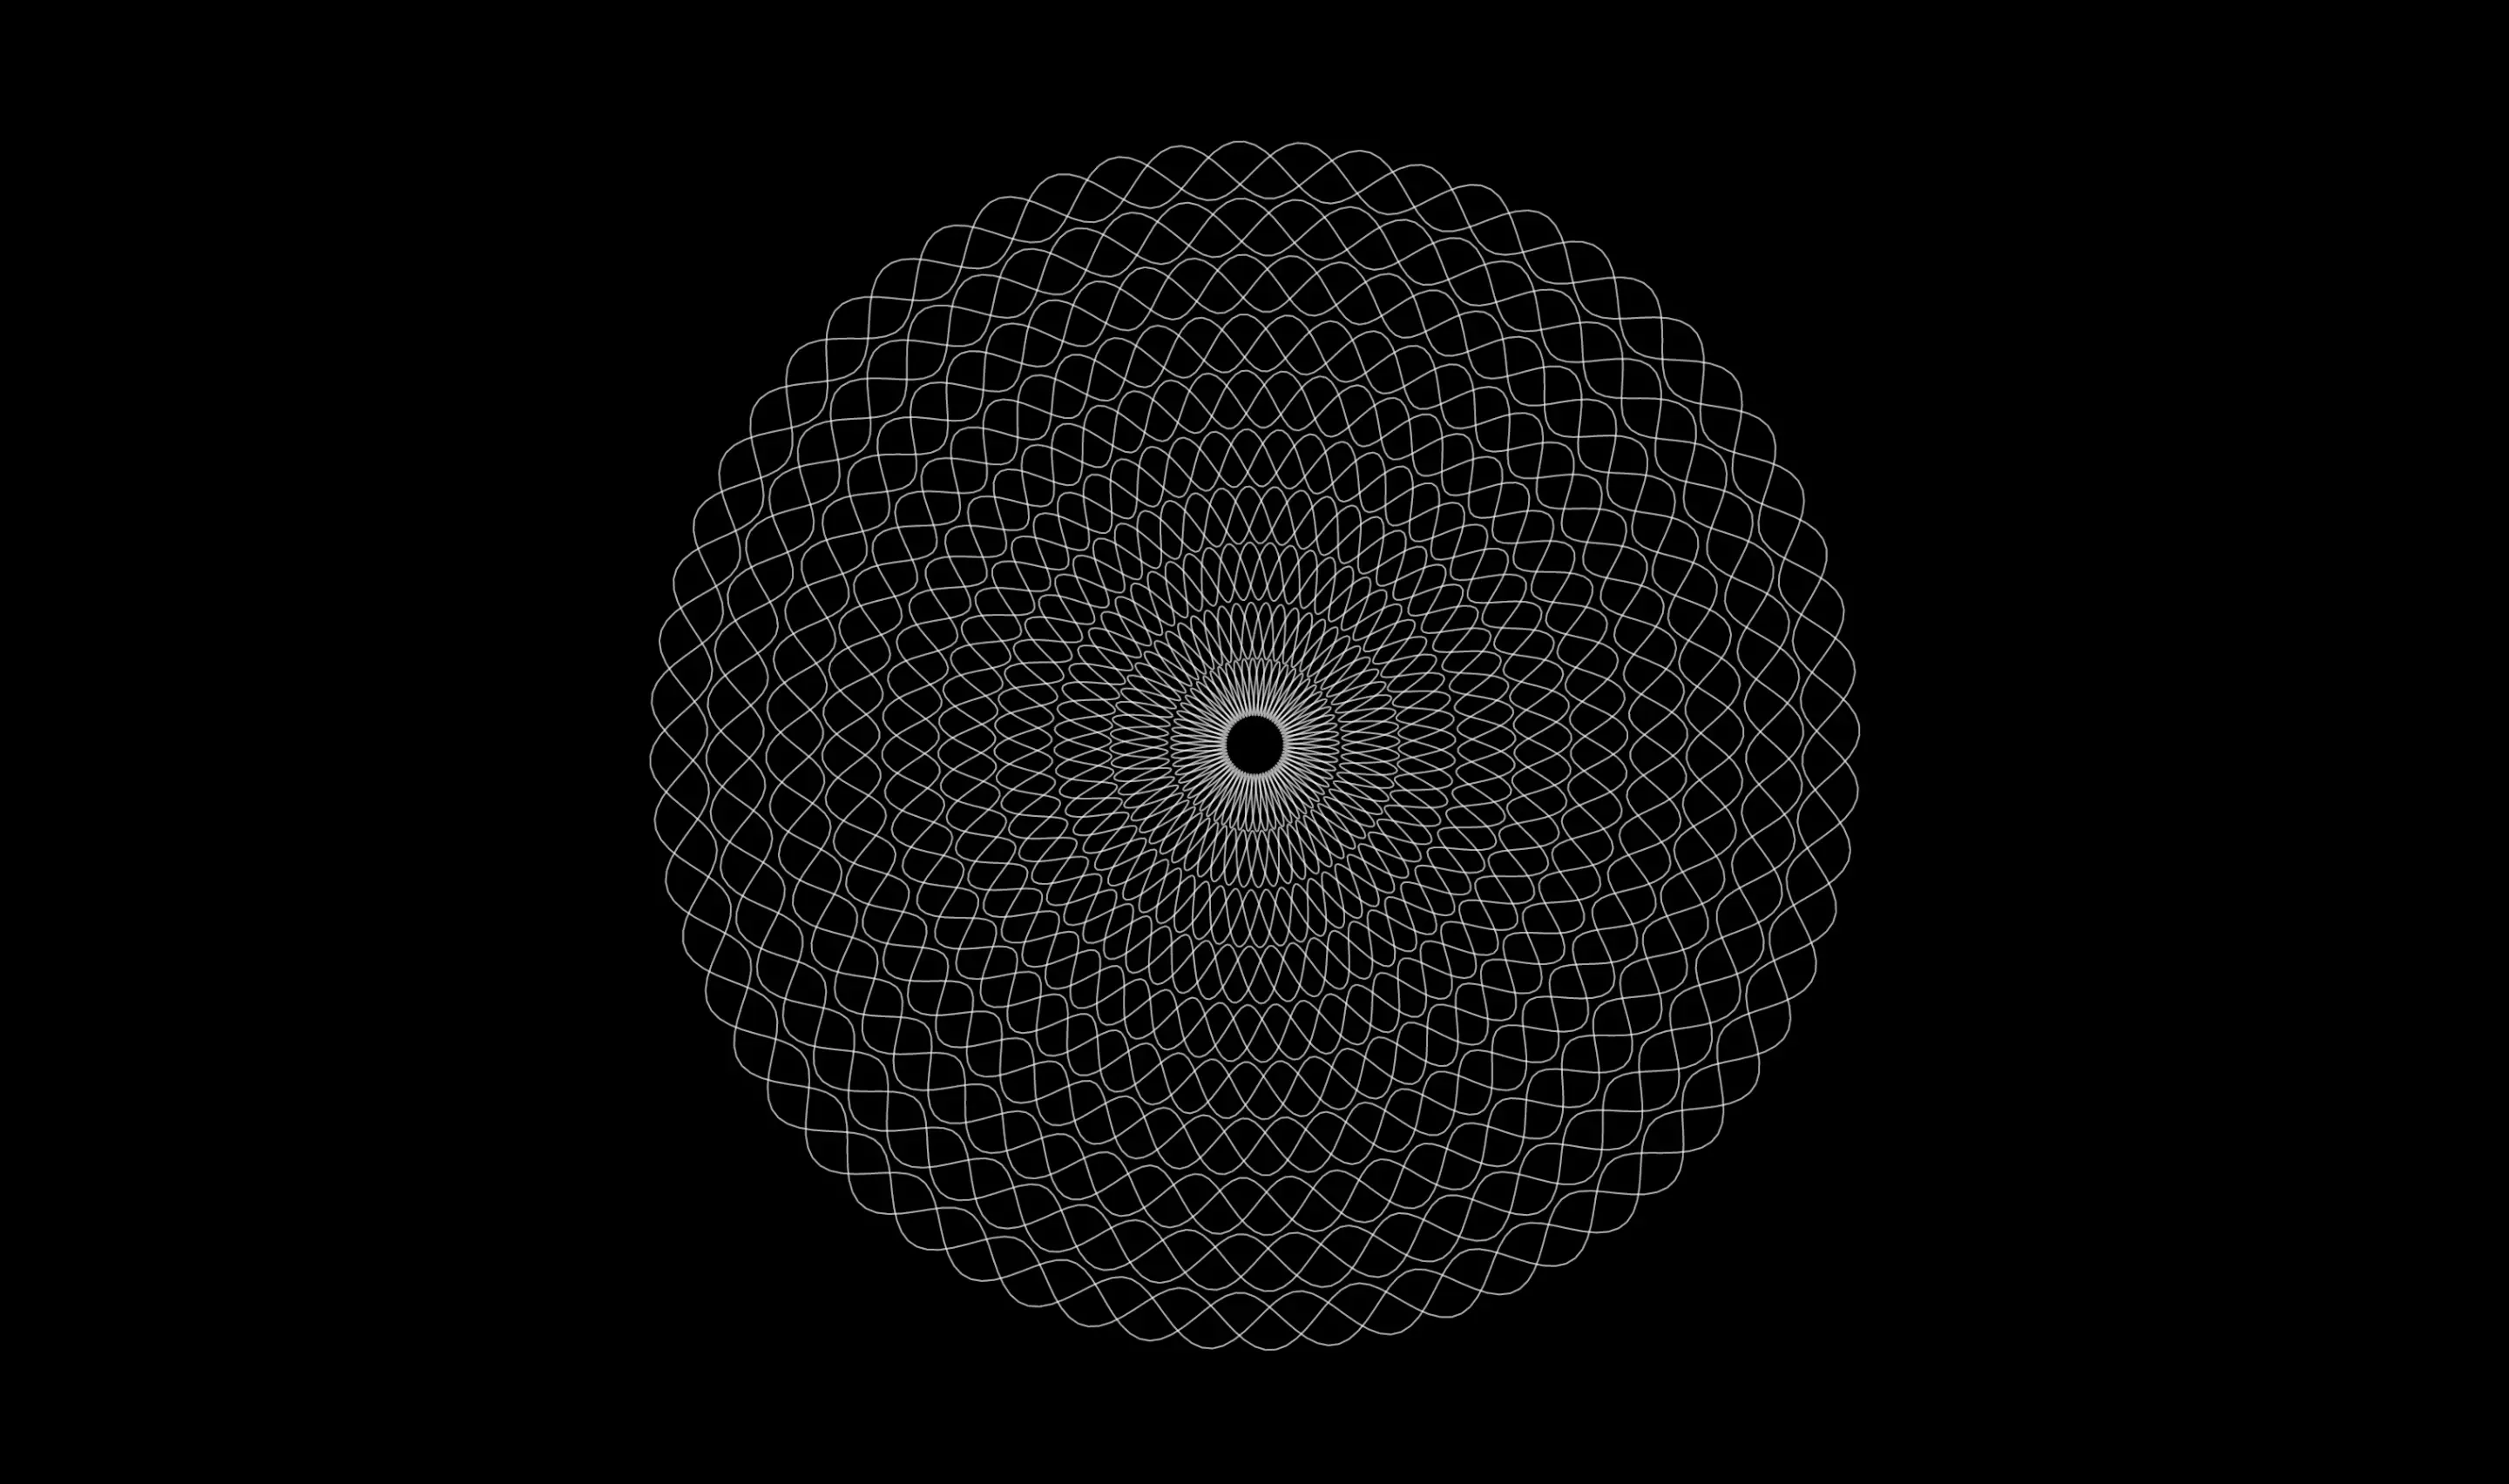 A computer generated graphic created from sinusoidal lines that combine to illustrate a flower.